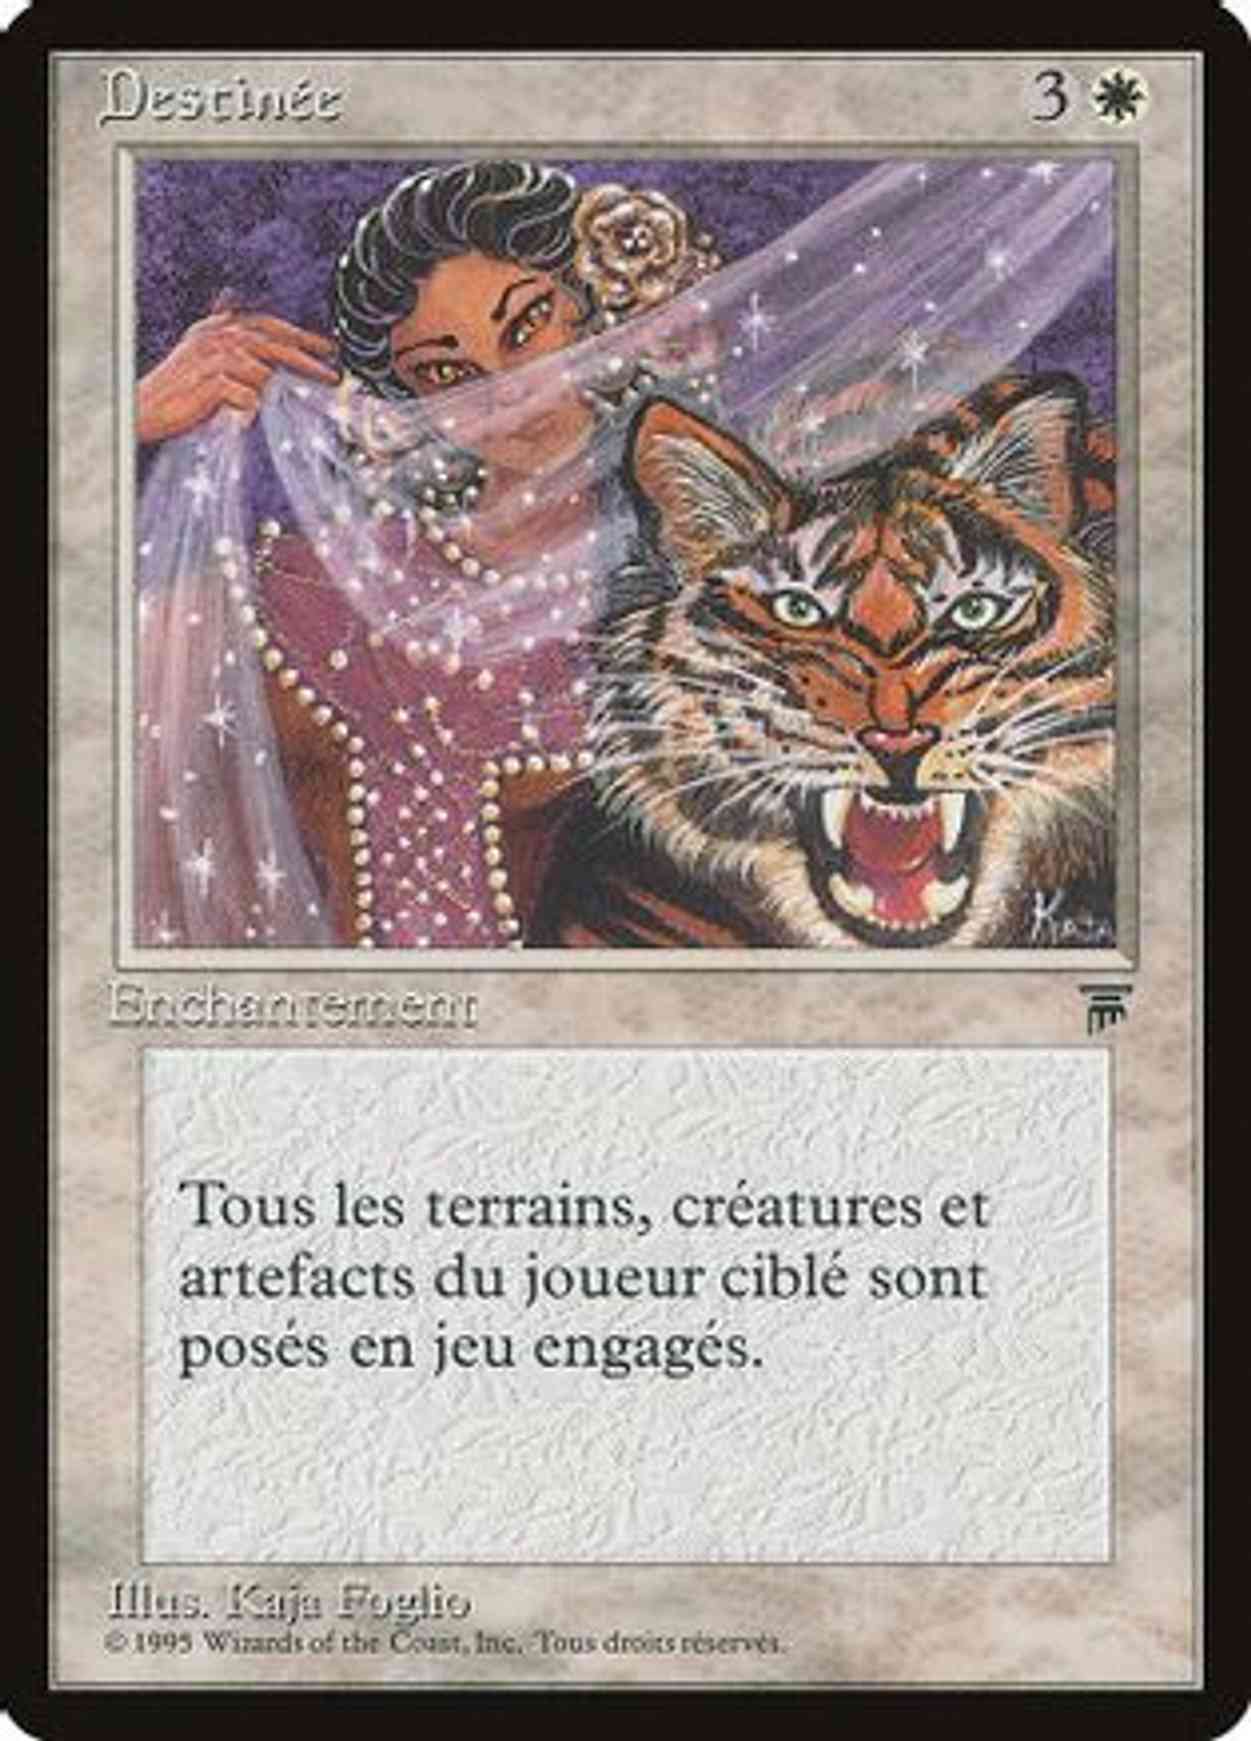 Kismet (French) - "Destinee" magic card front